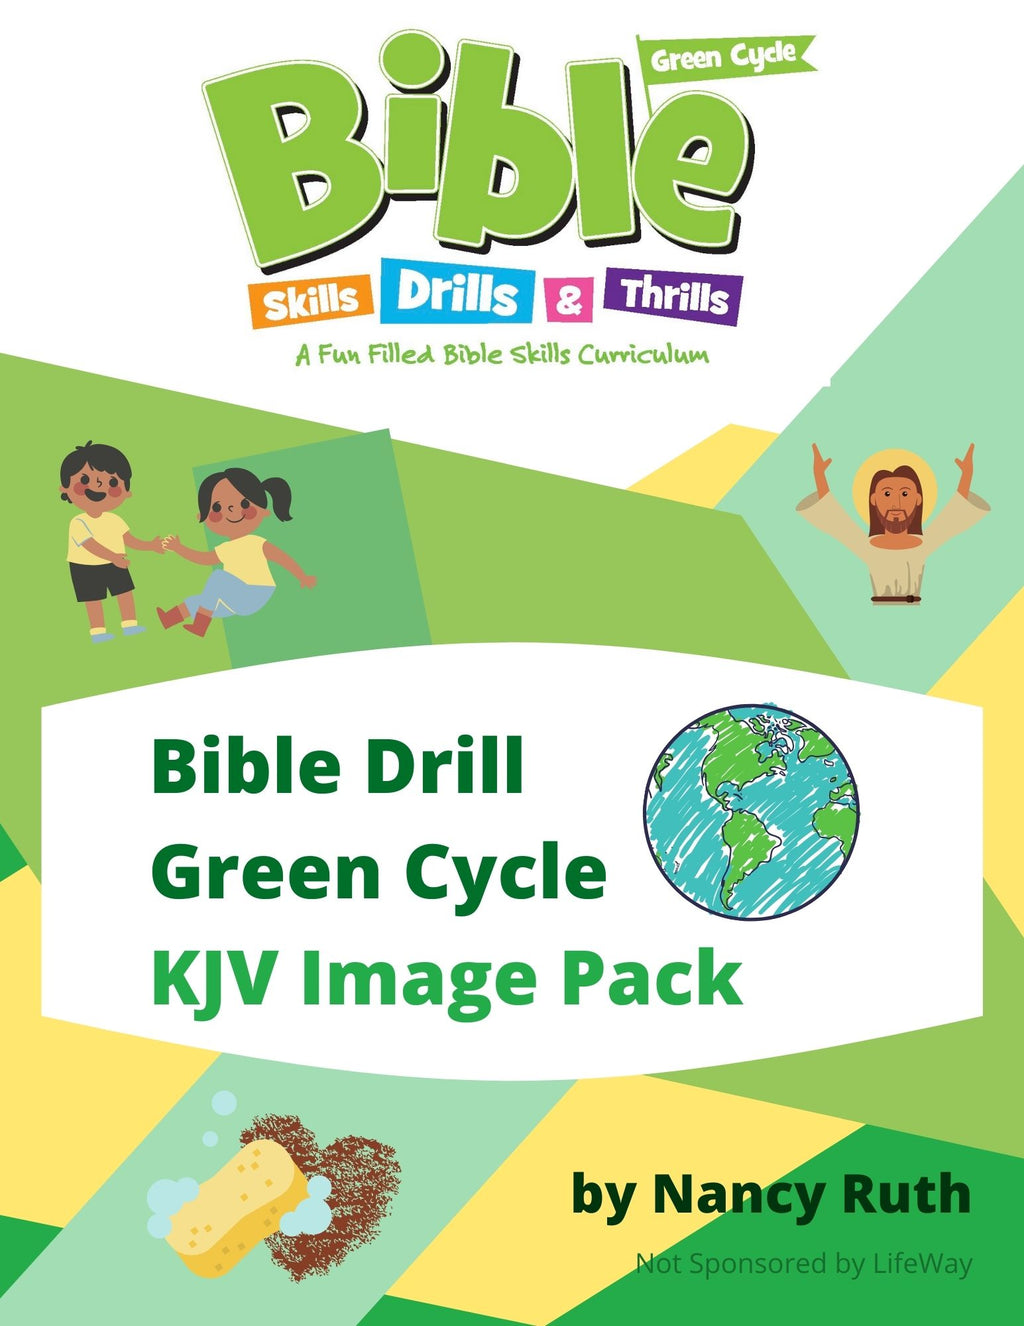 Bible Drill Green Cycle Image Pack (KJV, ESV, or CSB)